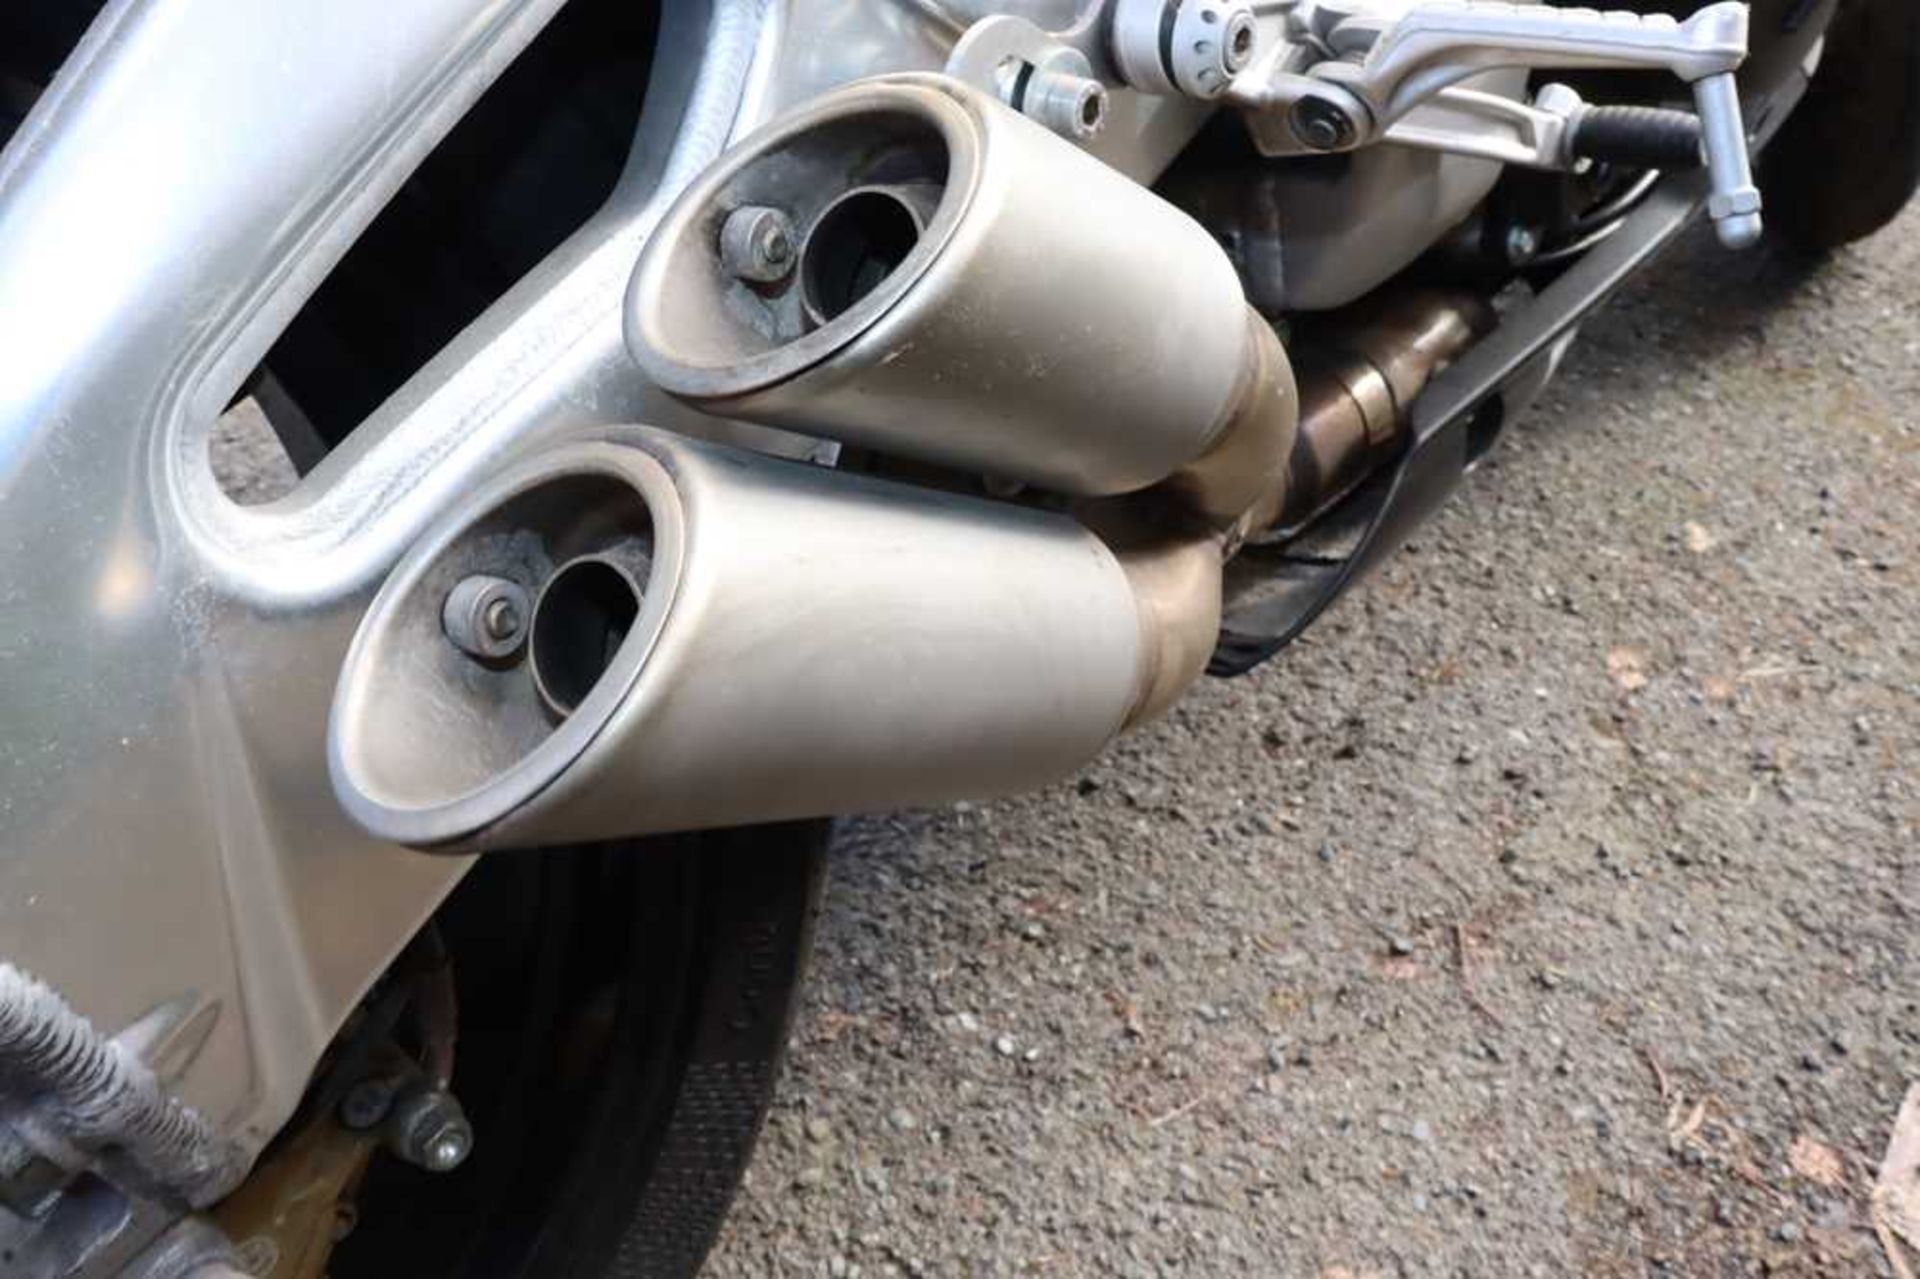 2010 Aprilia RSV4R Fitted with Moto GP style exhaust, original included - Image 35 of 44